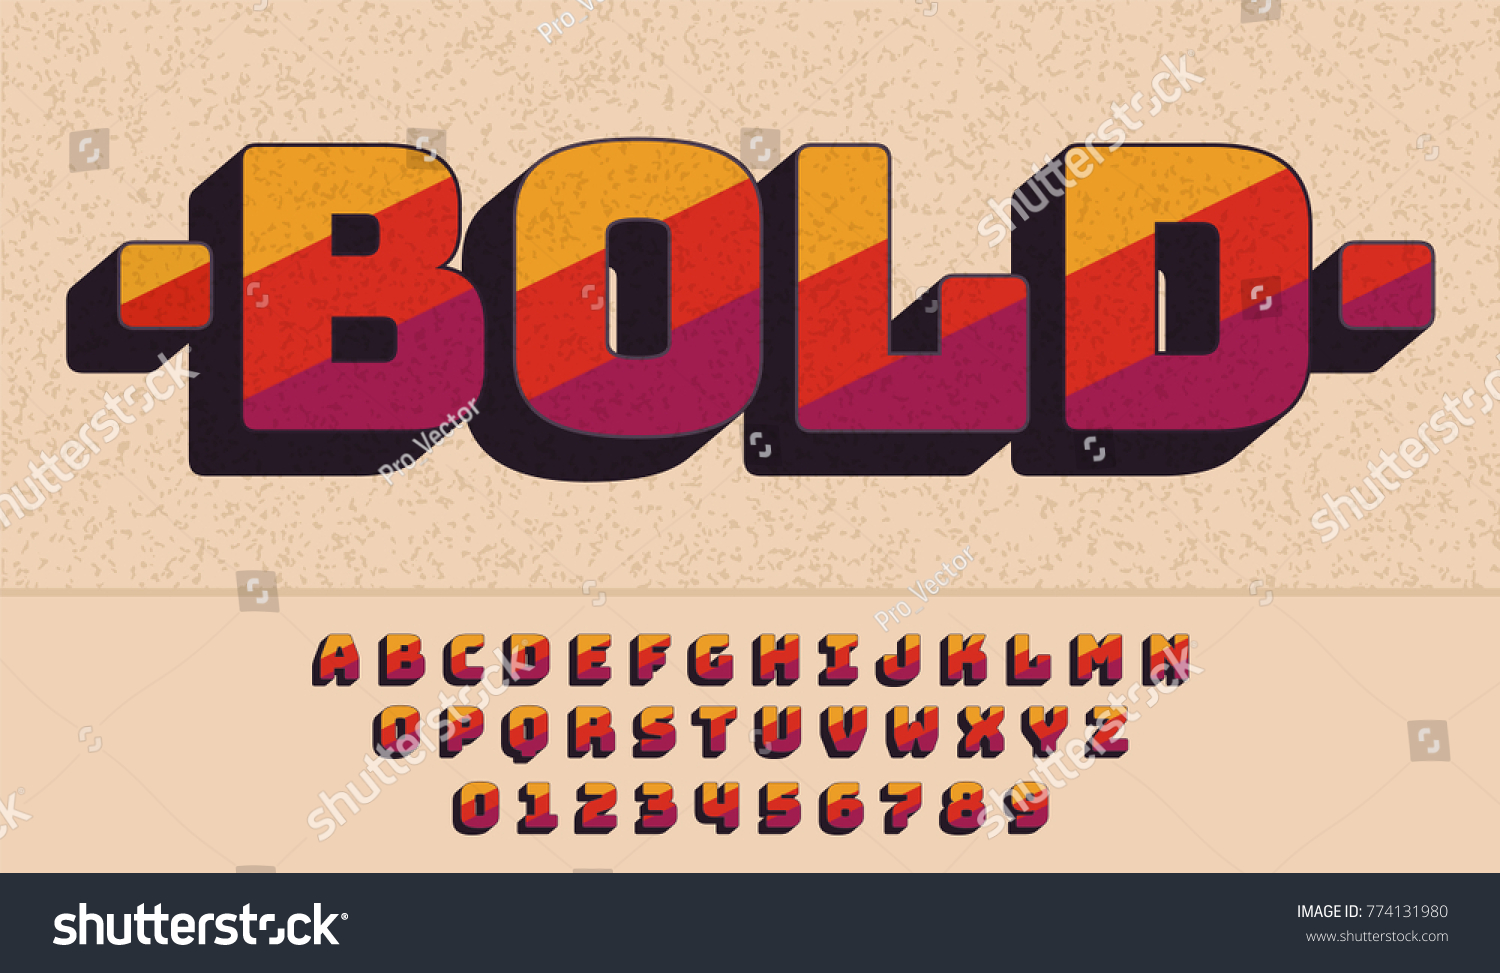 Retro Bold Font 90s 80s Colorful Stock Vector (Royalty Free) 774131980 Shut...